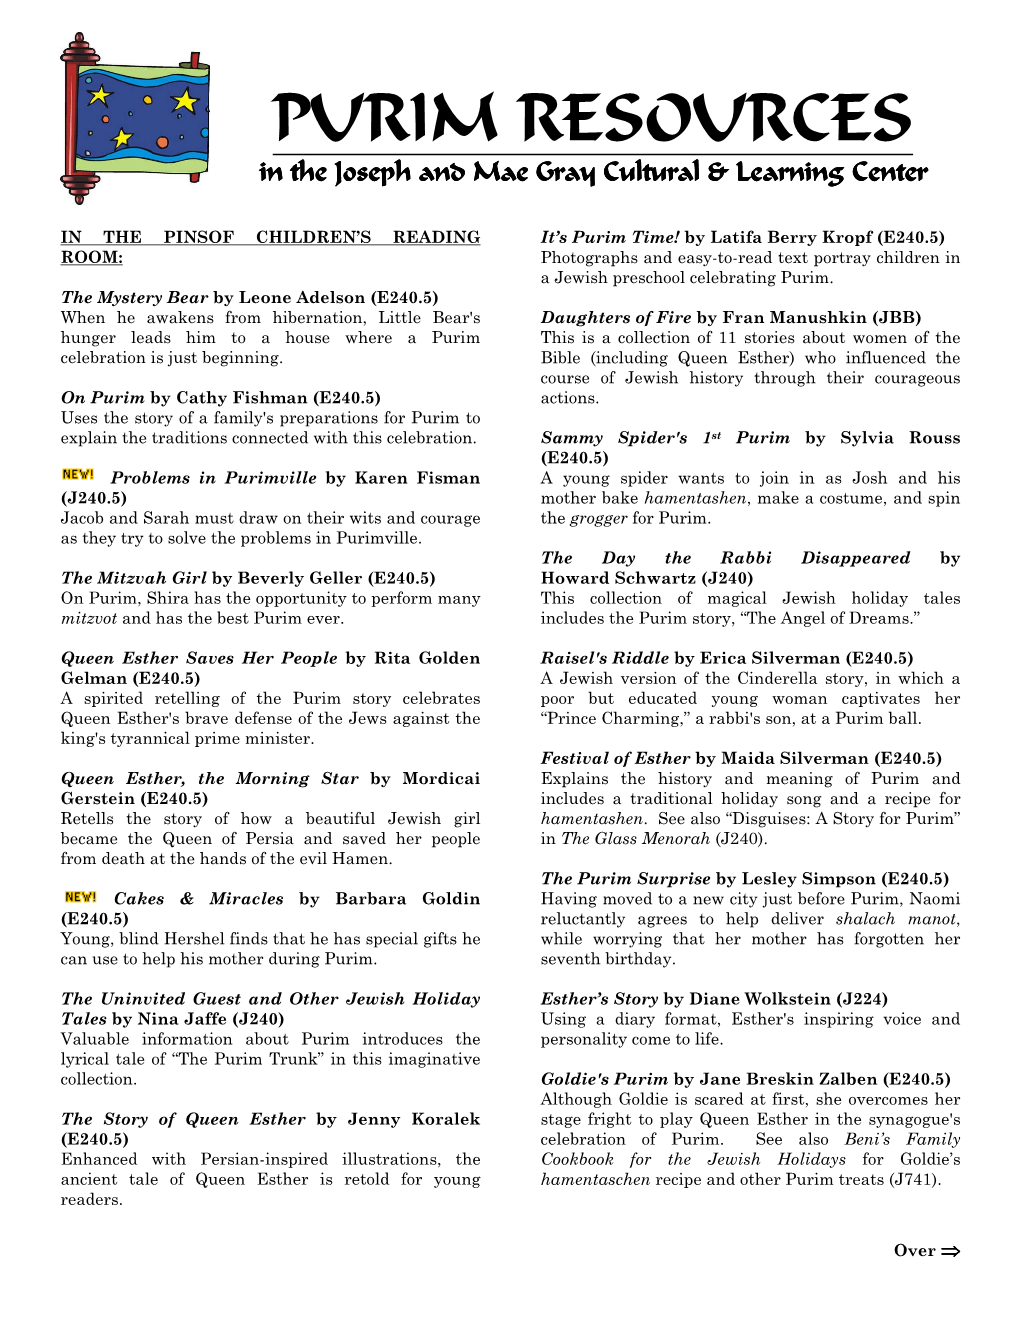 PURIM RESOURCES in the Joseph and Mae Gray Cultural & Learning Center